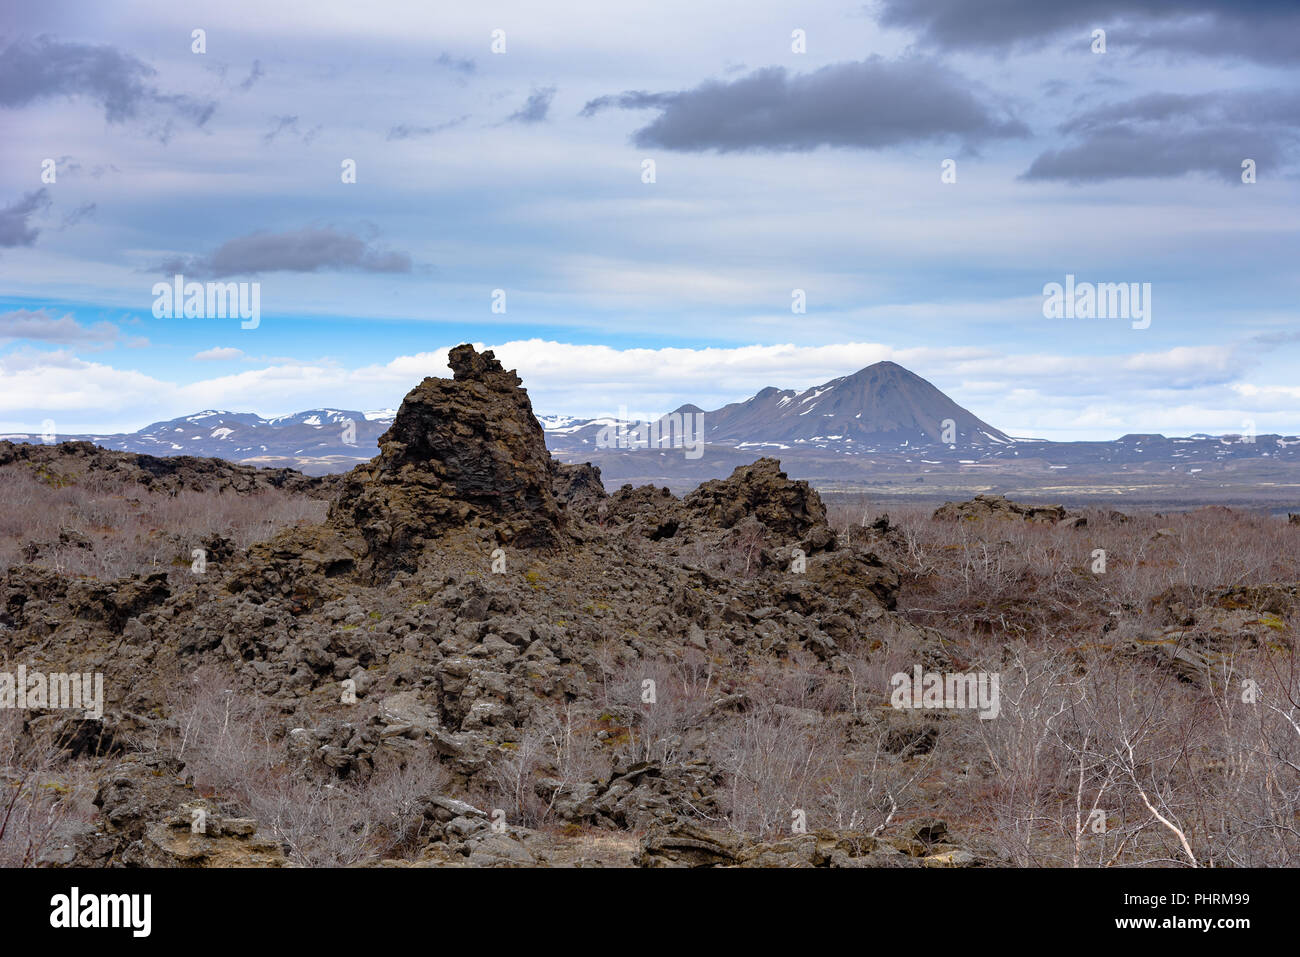 The Dimmuborgir rock formations in northern Iceland Stock Photo